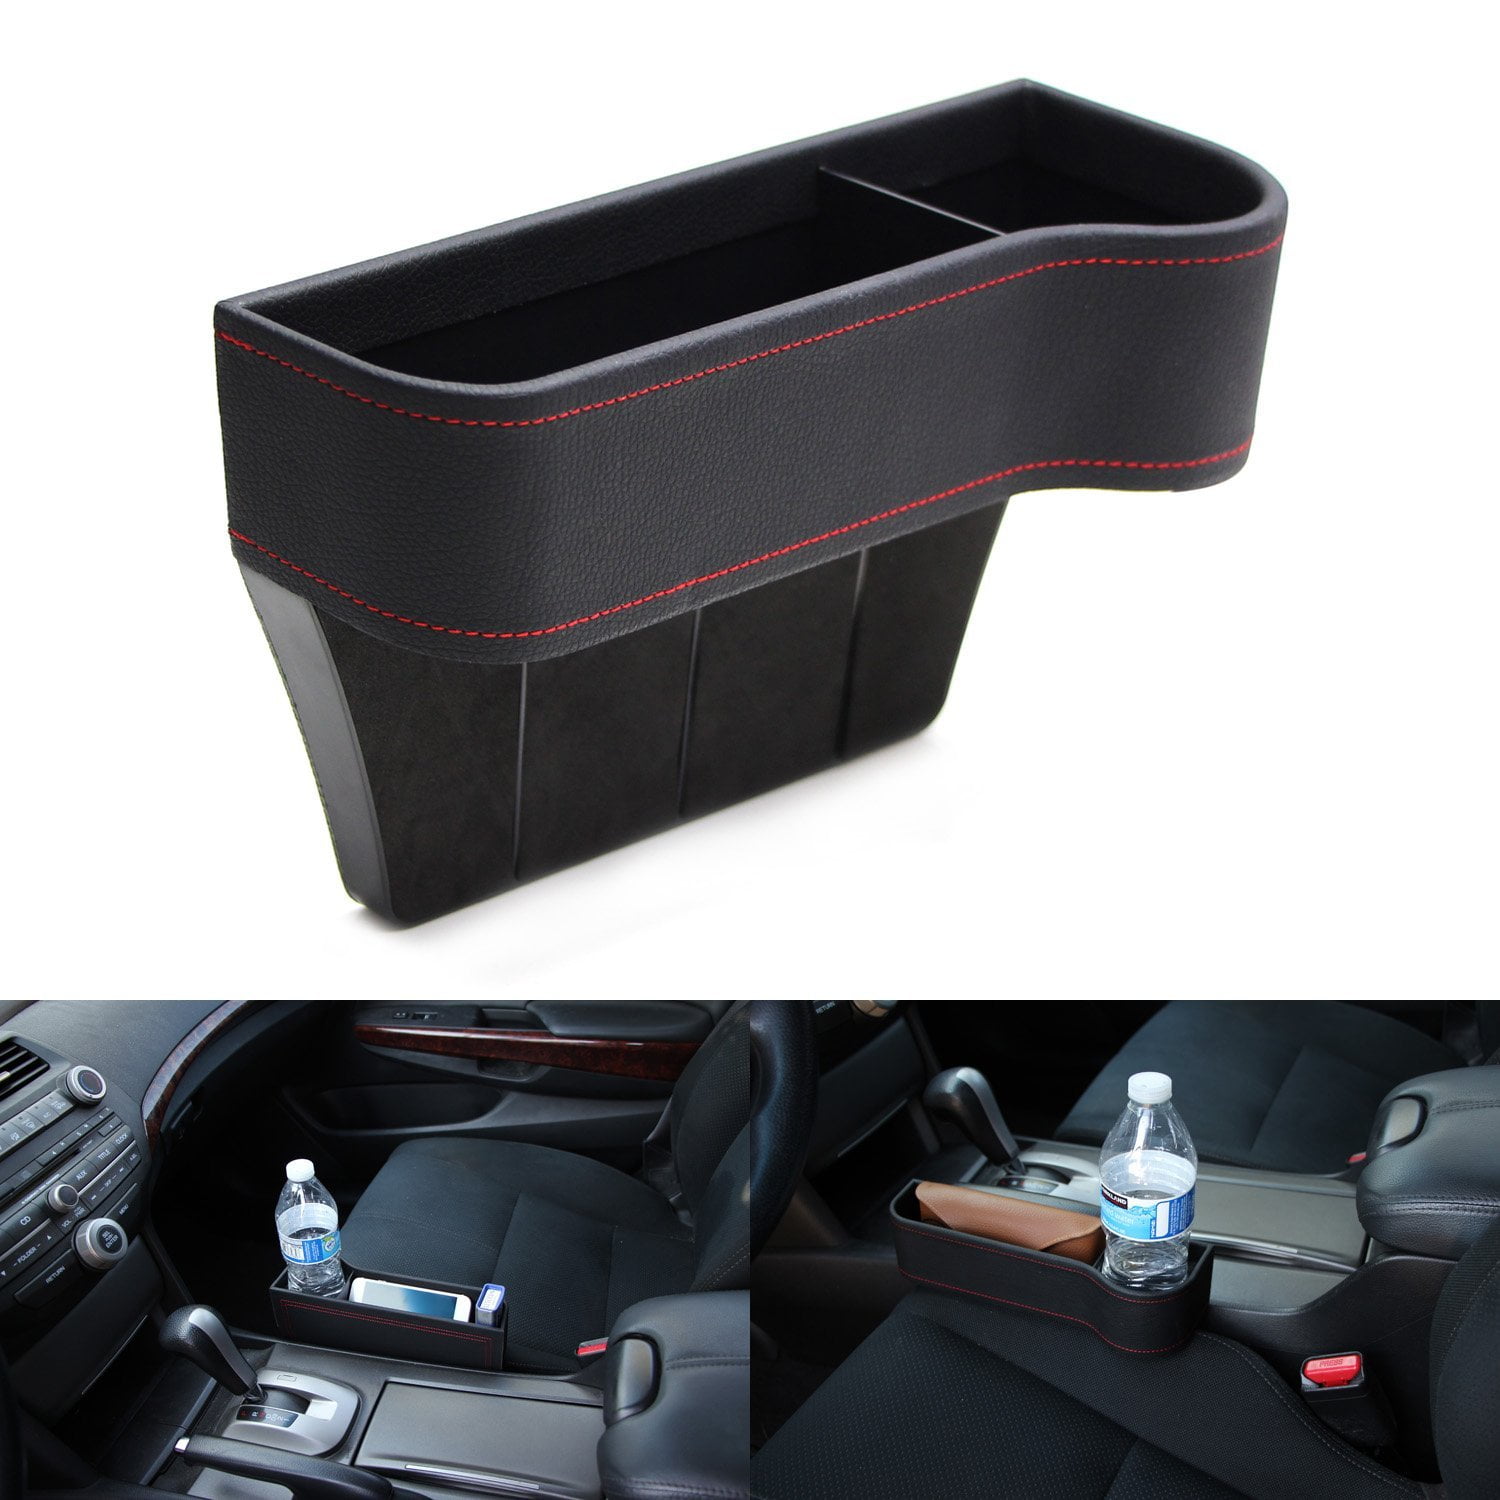 Temi Car Gap Filler Organizer 2 Pack PU Car Seat Storage with Cup Holder Seat Console Side Pocket for Cellphones Keys Cards Wallets Brown Sunglasses